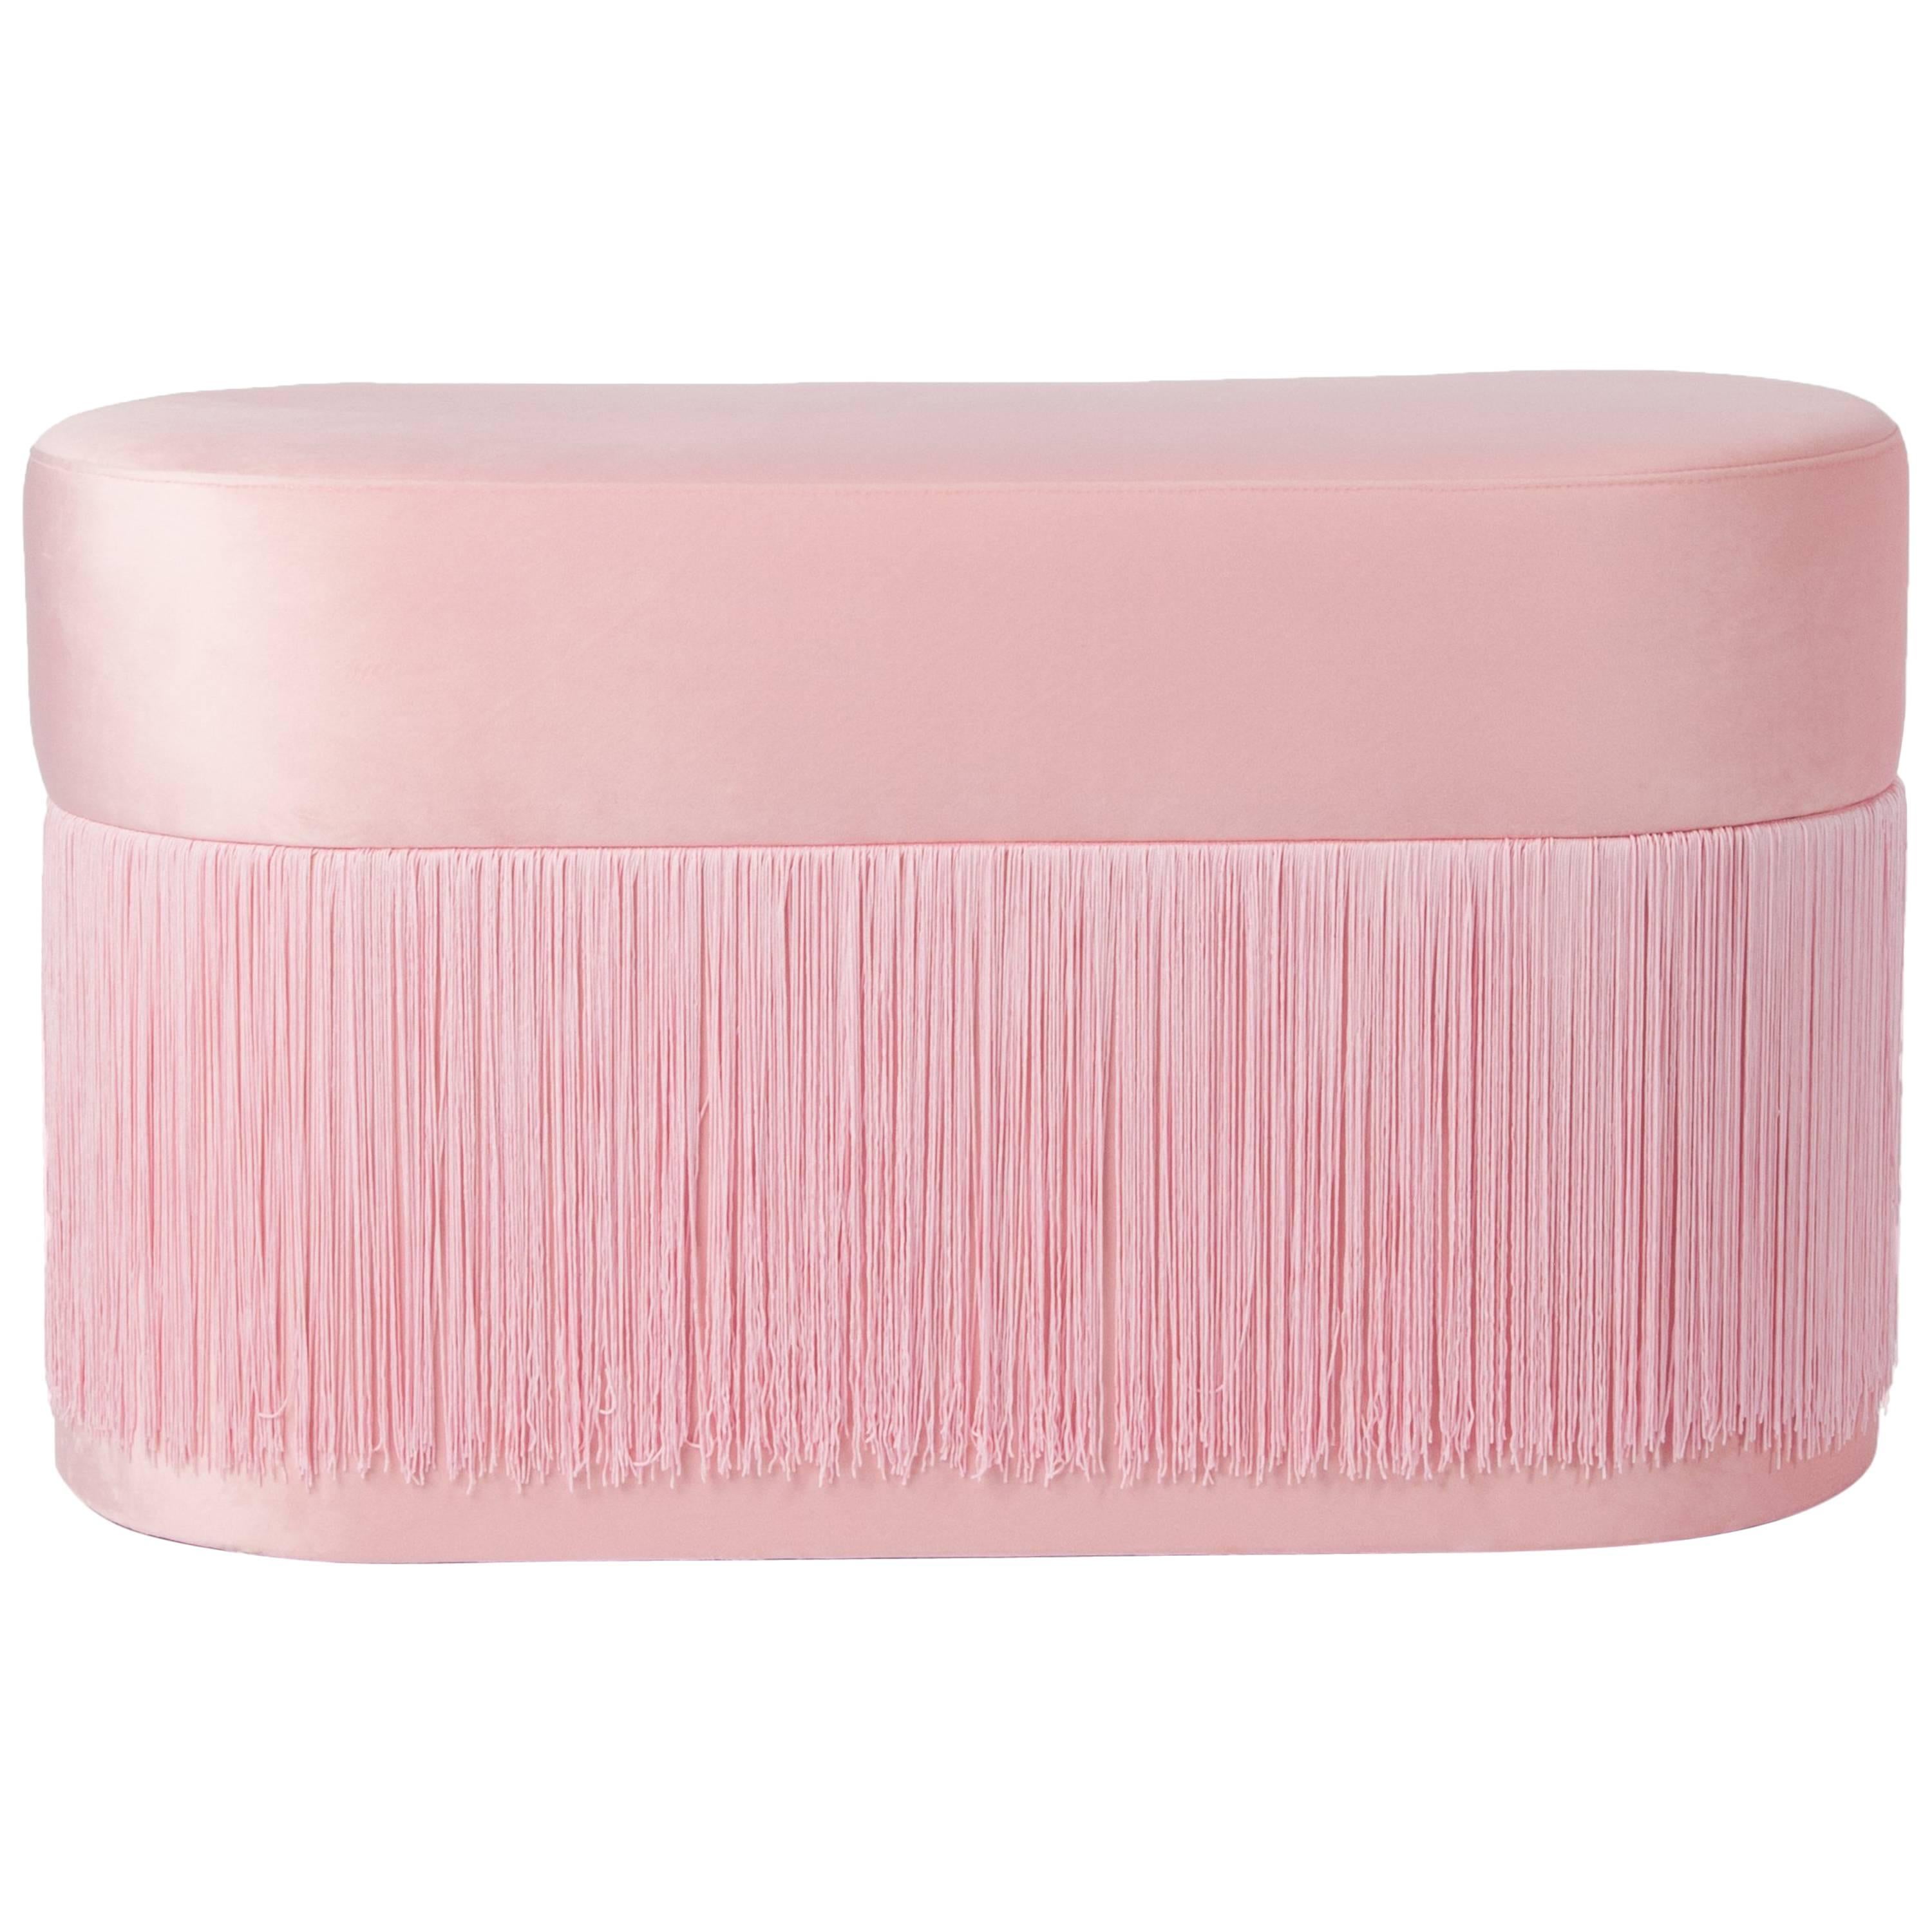 Pouf Pill Large Pink in Velvet Upholstery with Fringes For Sale